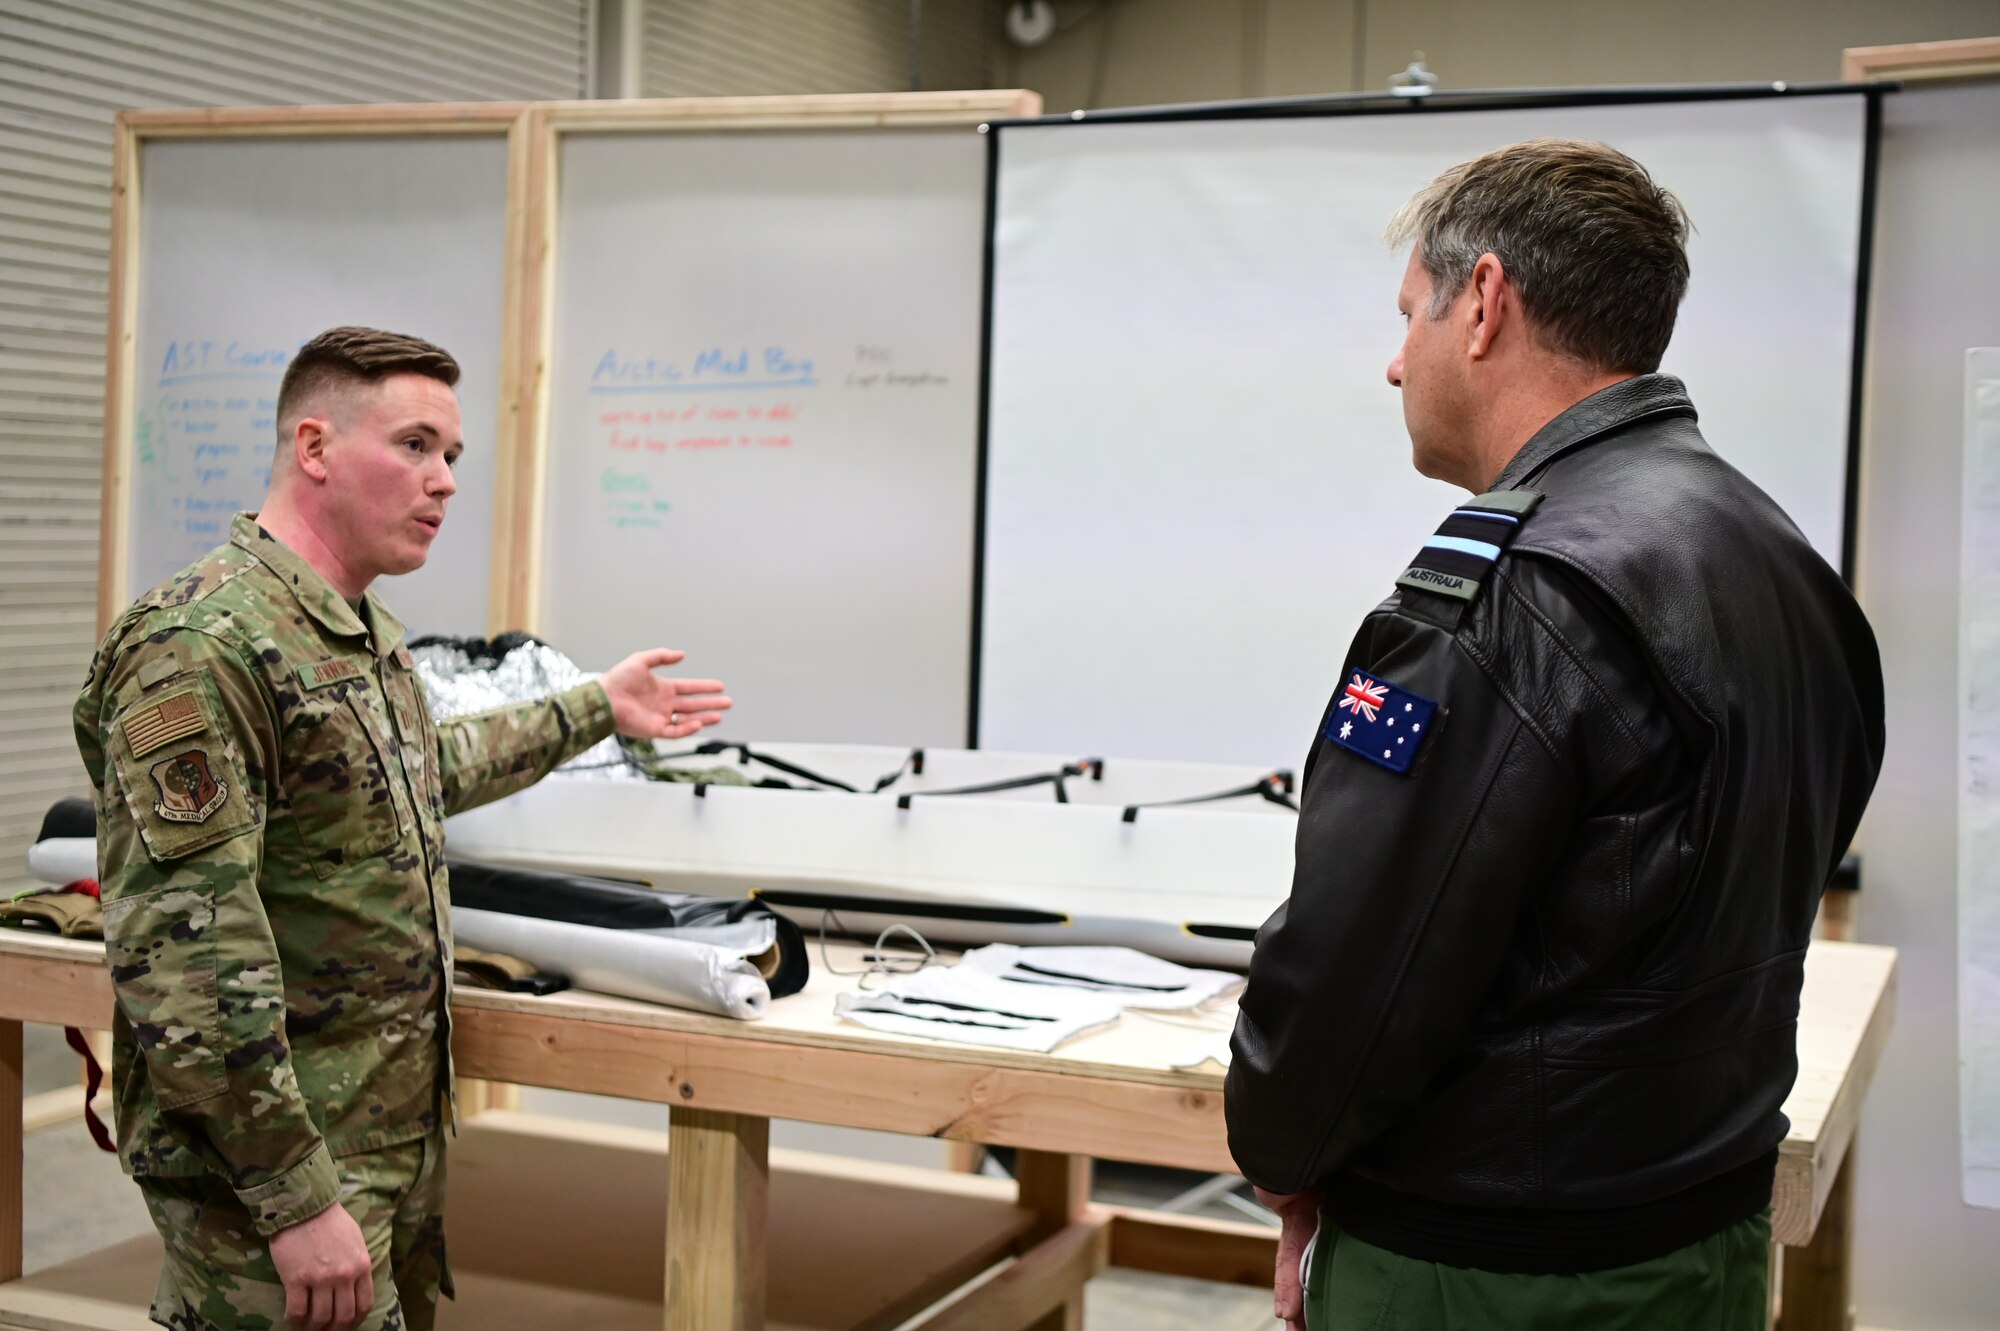 Royal Australian Air Force Air Vice-Marshal Carl Newman, Pacific Air Forces deputy commander, discusses the importance of health programs with leading officers of the 673d Medical Group at Joint Base Elmendorf-Richardson, Alaska, March 29, 2023. During the meeting, the 673d MDG presented Newman with informative slides on how mental health programs are actively supporting JBER’s Arctic Warriors. (U.S. Air Force photo by Airman 1st Class Quatasia Carter)